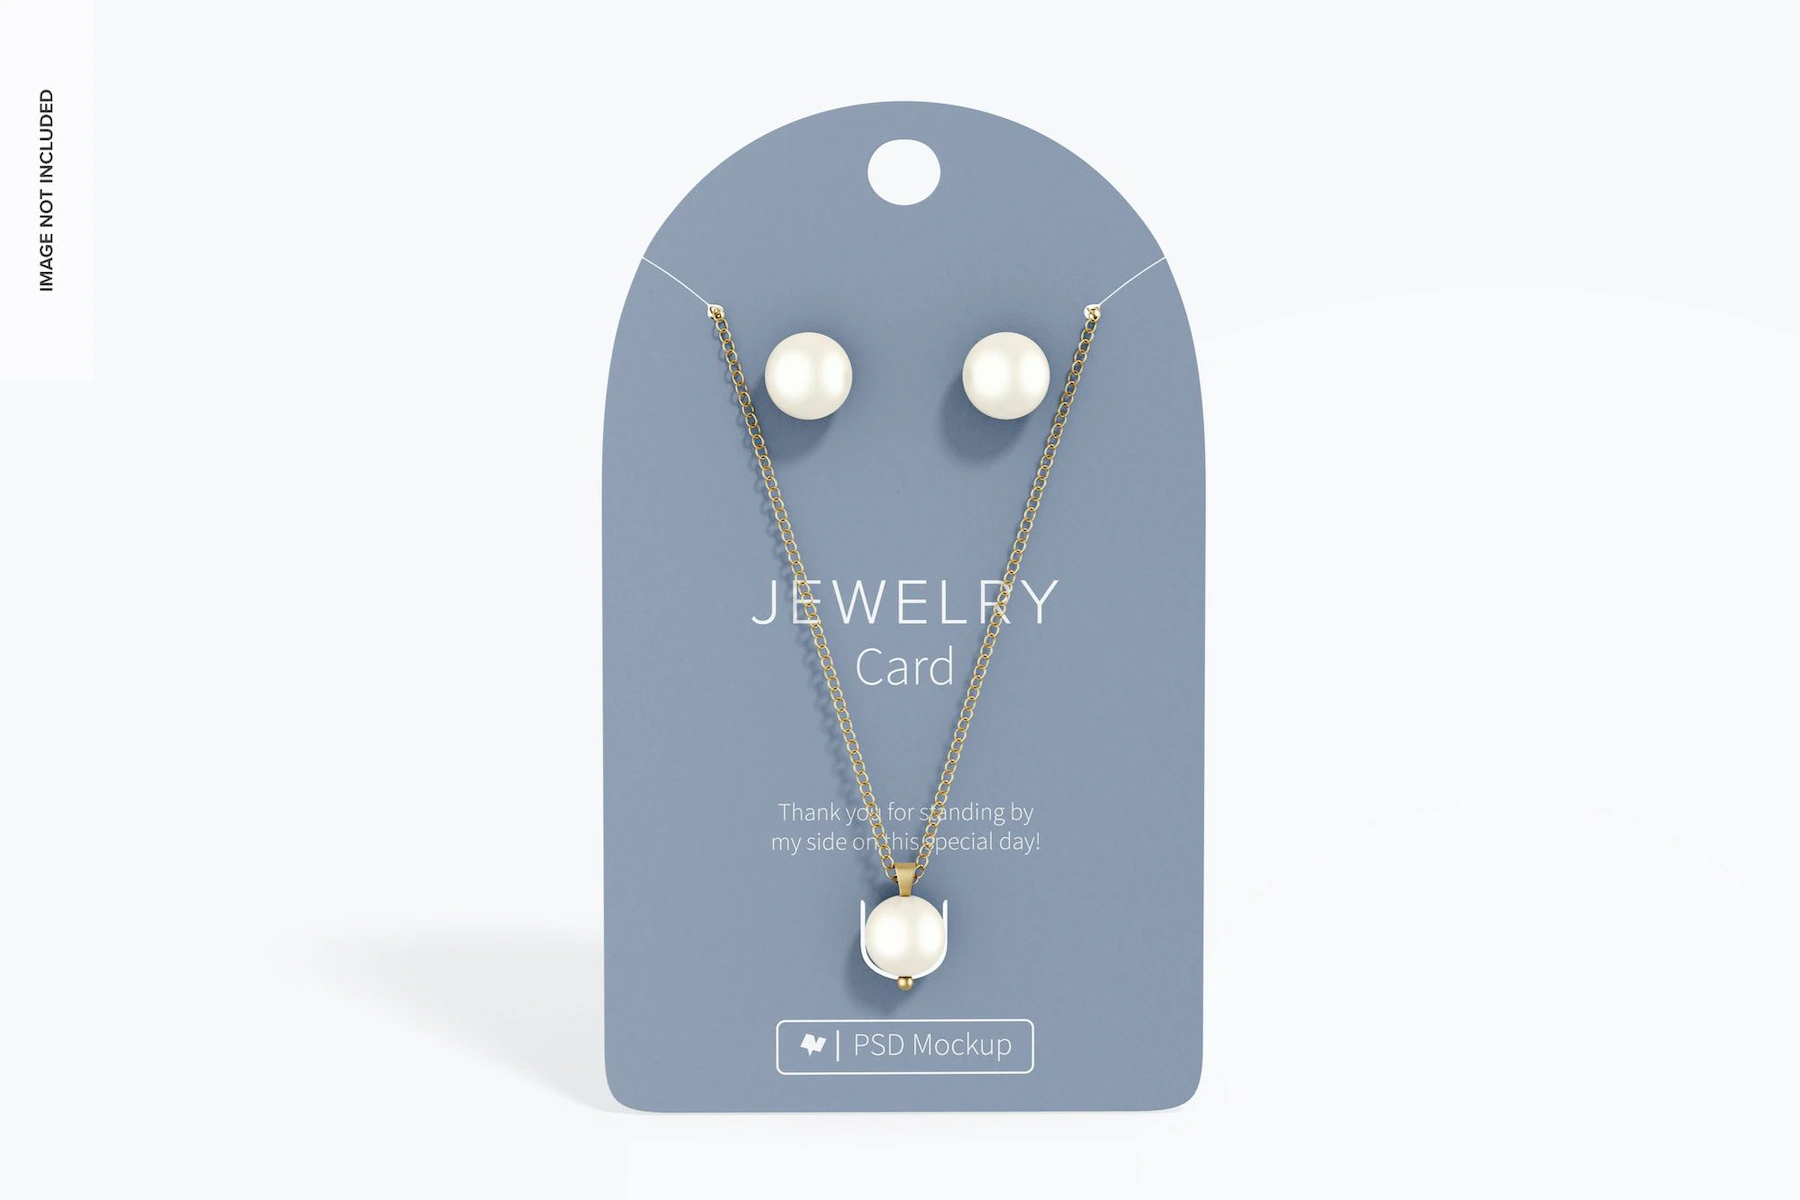 jewelry card mockup front view 1332 10528